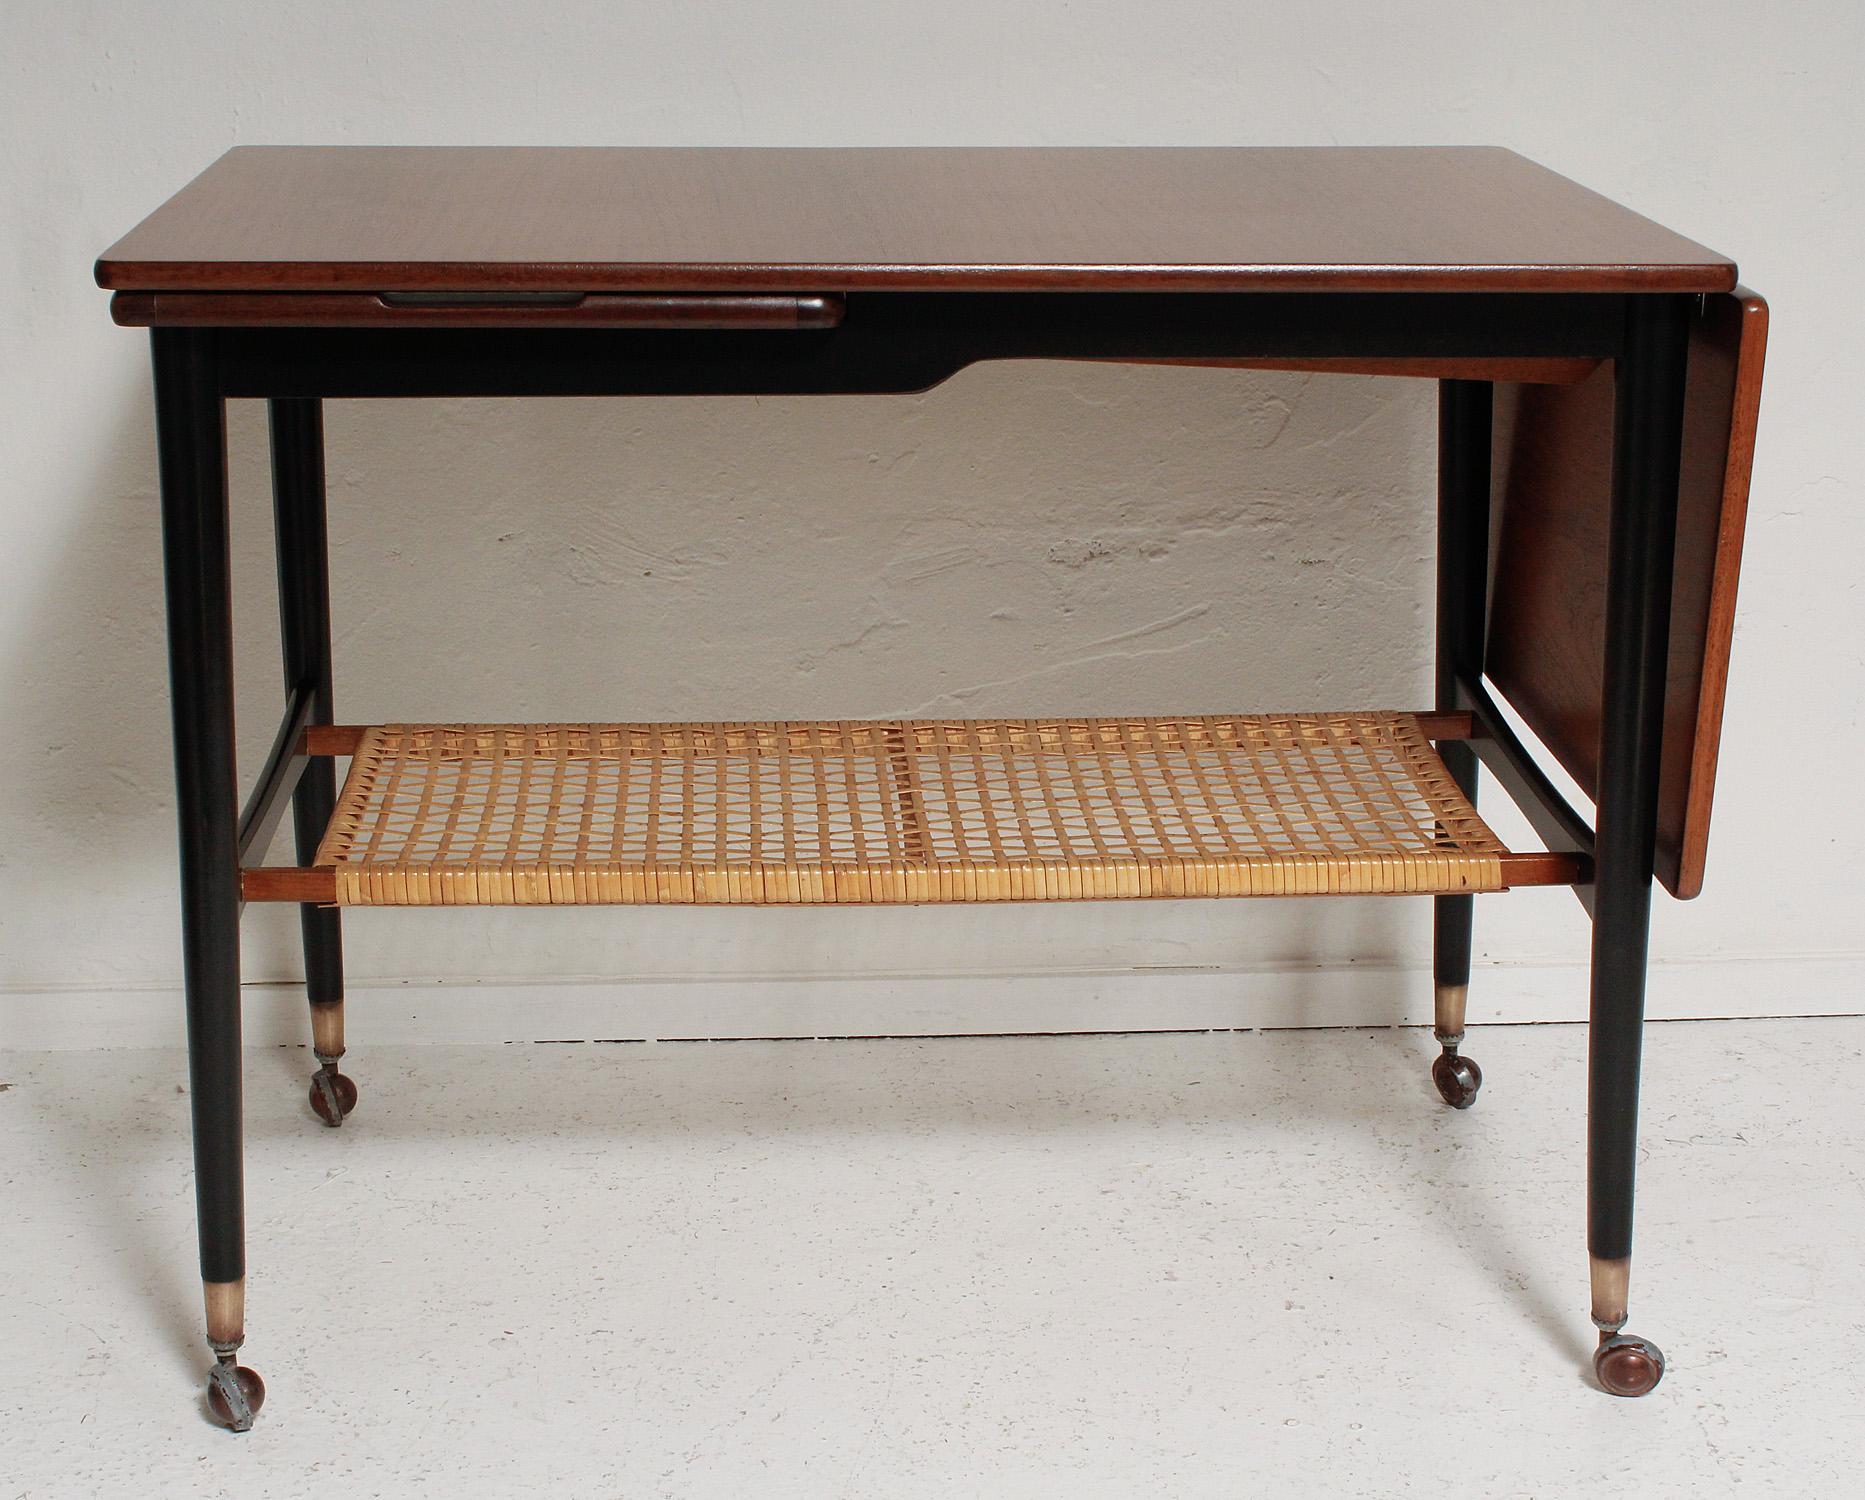 It's a side table, a coffee table, a serving table - it's a beautifully restored Danish walnut and rattan drop-leaf host/Hostess table with slide-out stainless steel serving tray, black painted legs, and brass sabots, by Kresten Buch, circa 1960.